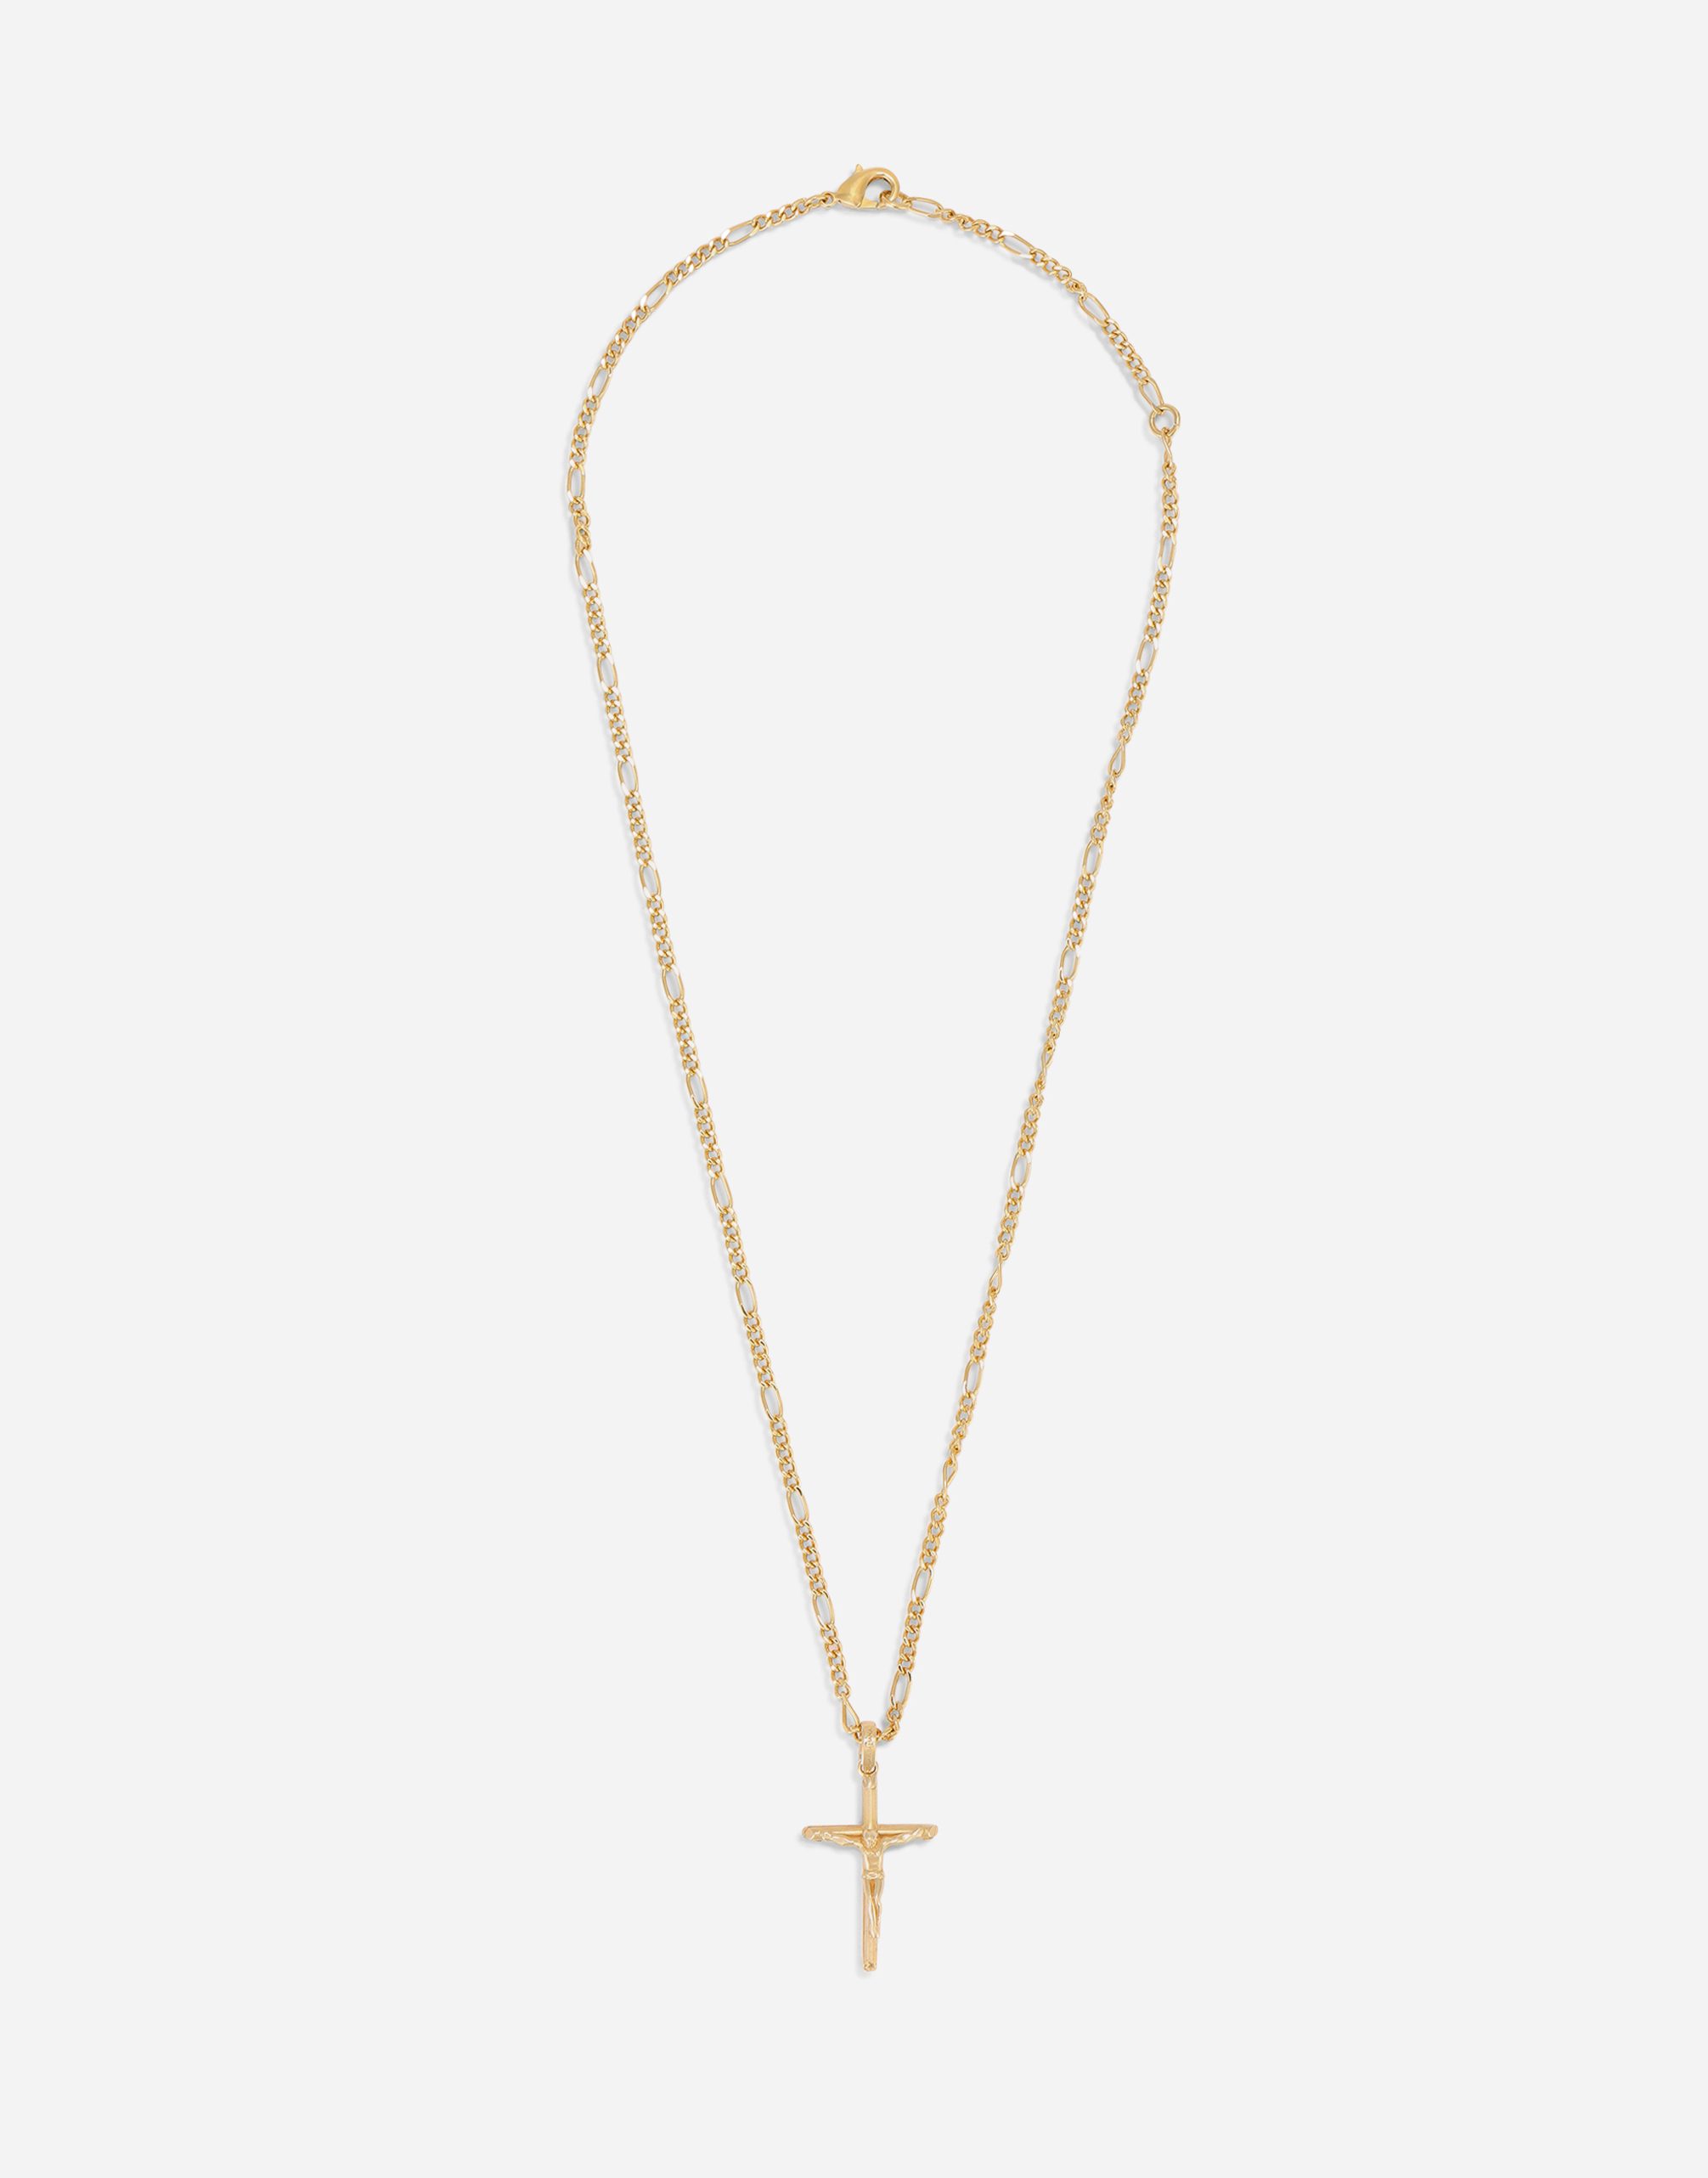 Cross necklace in Gold